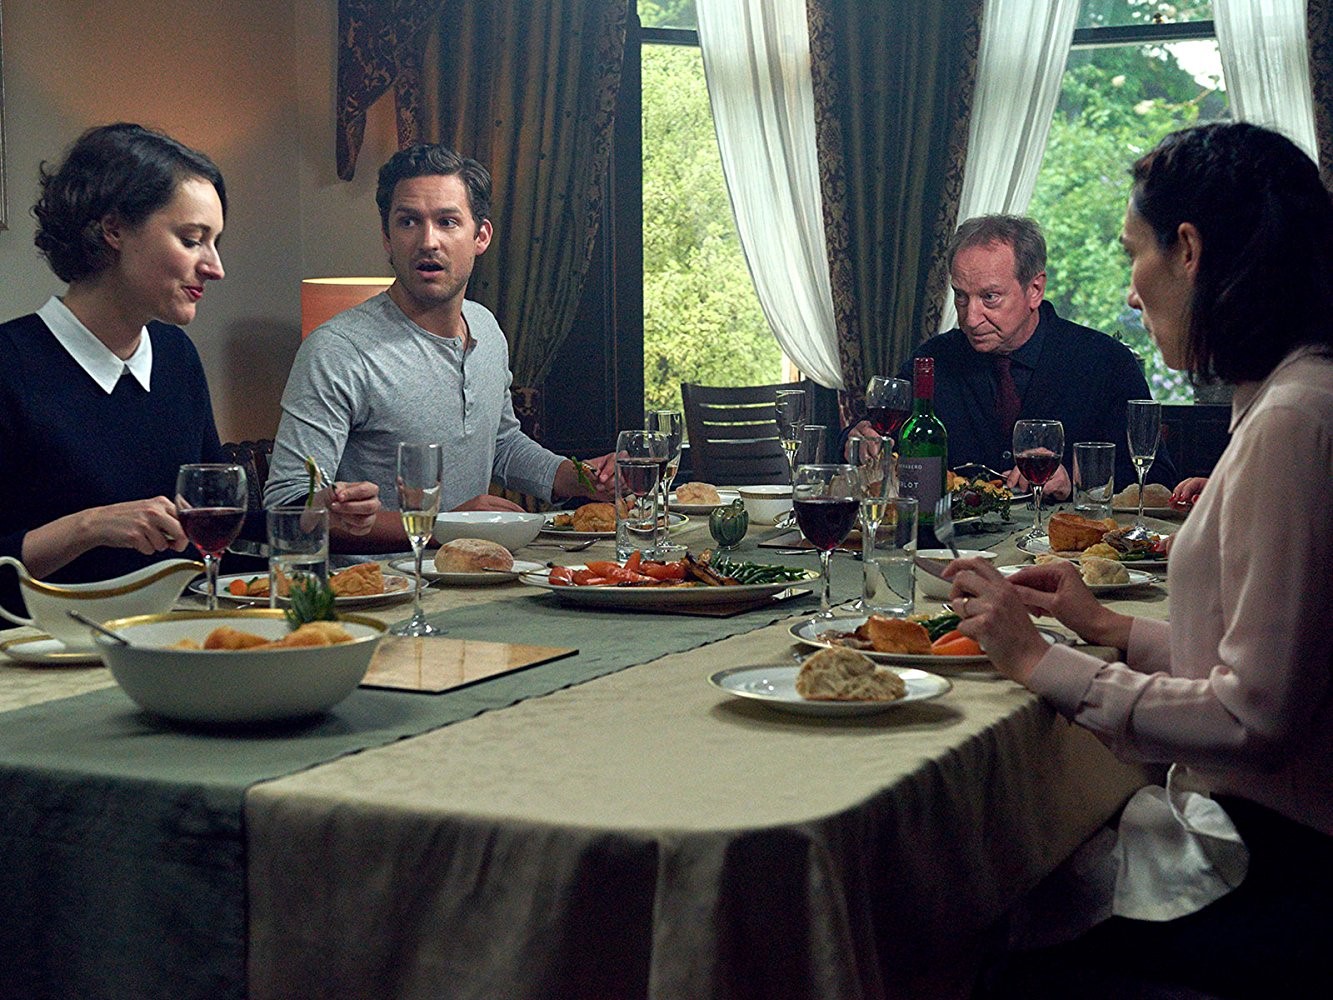 Image of a family eating dinner from the TV series, Fleabag